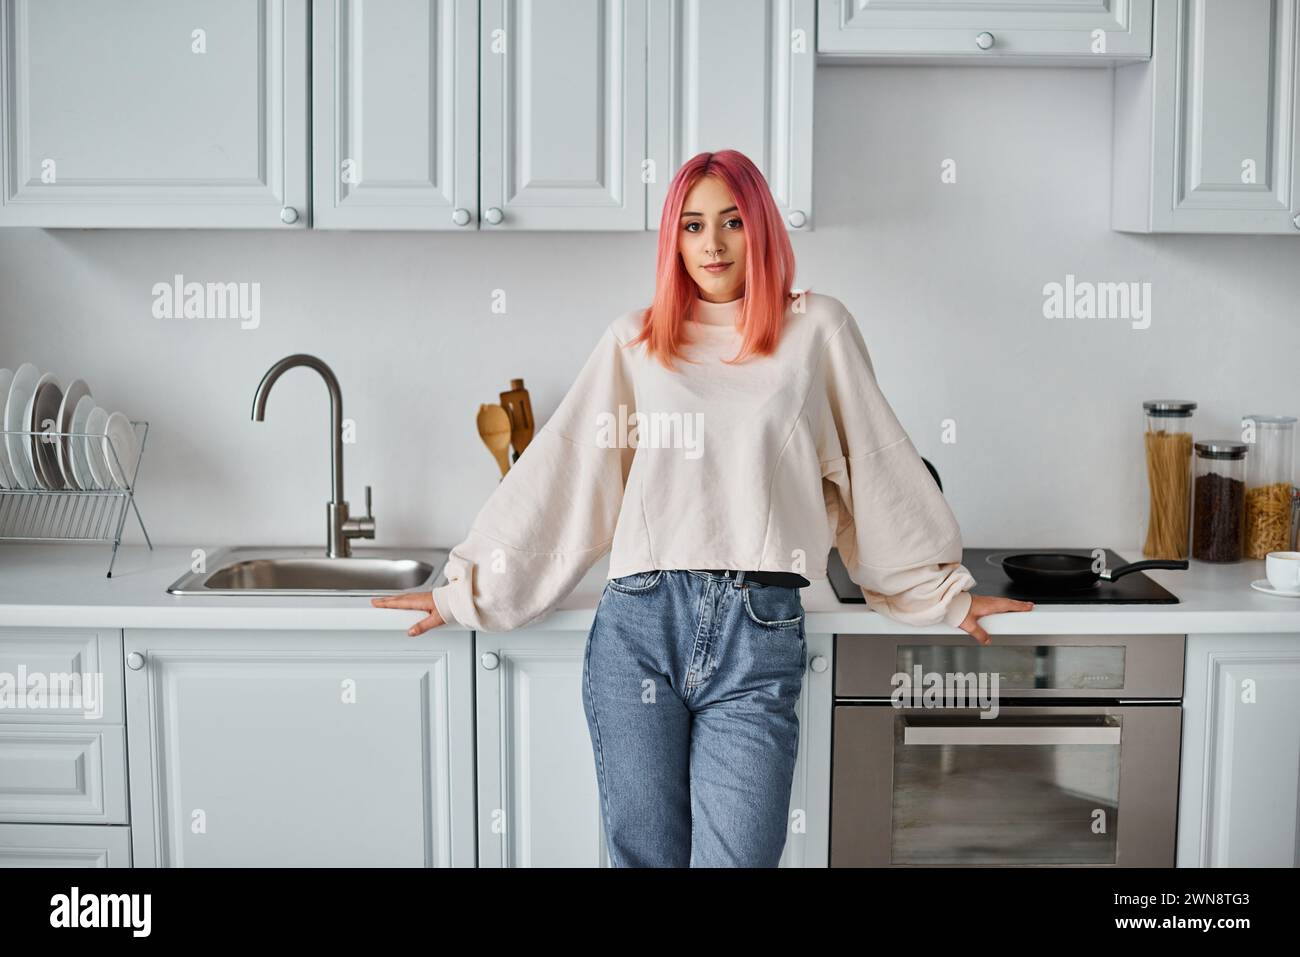 good looking jolly woman in casual jumper and jeans posing in kitchen and looking at camera Stock Photo